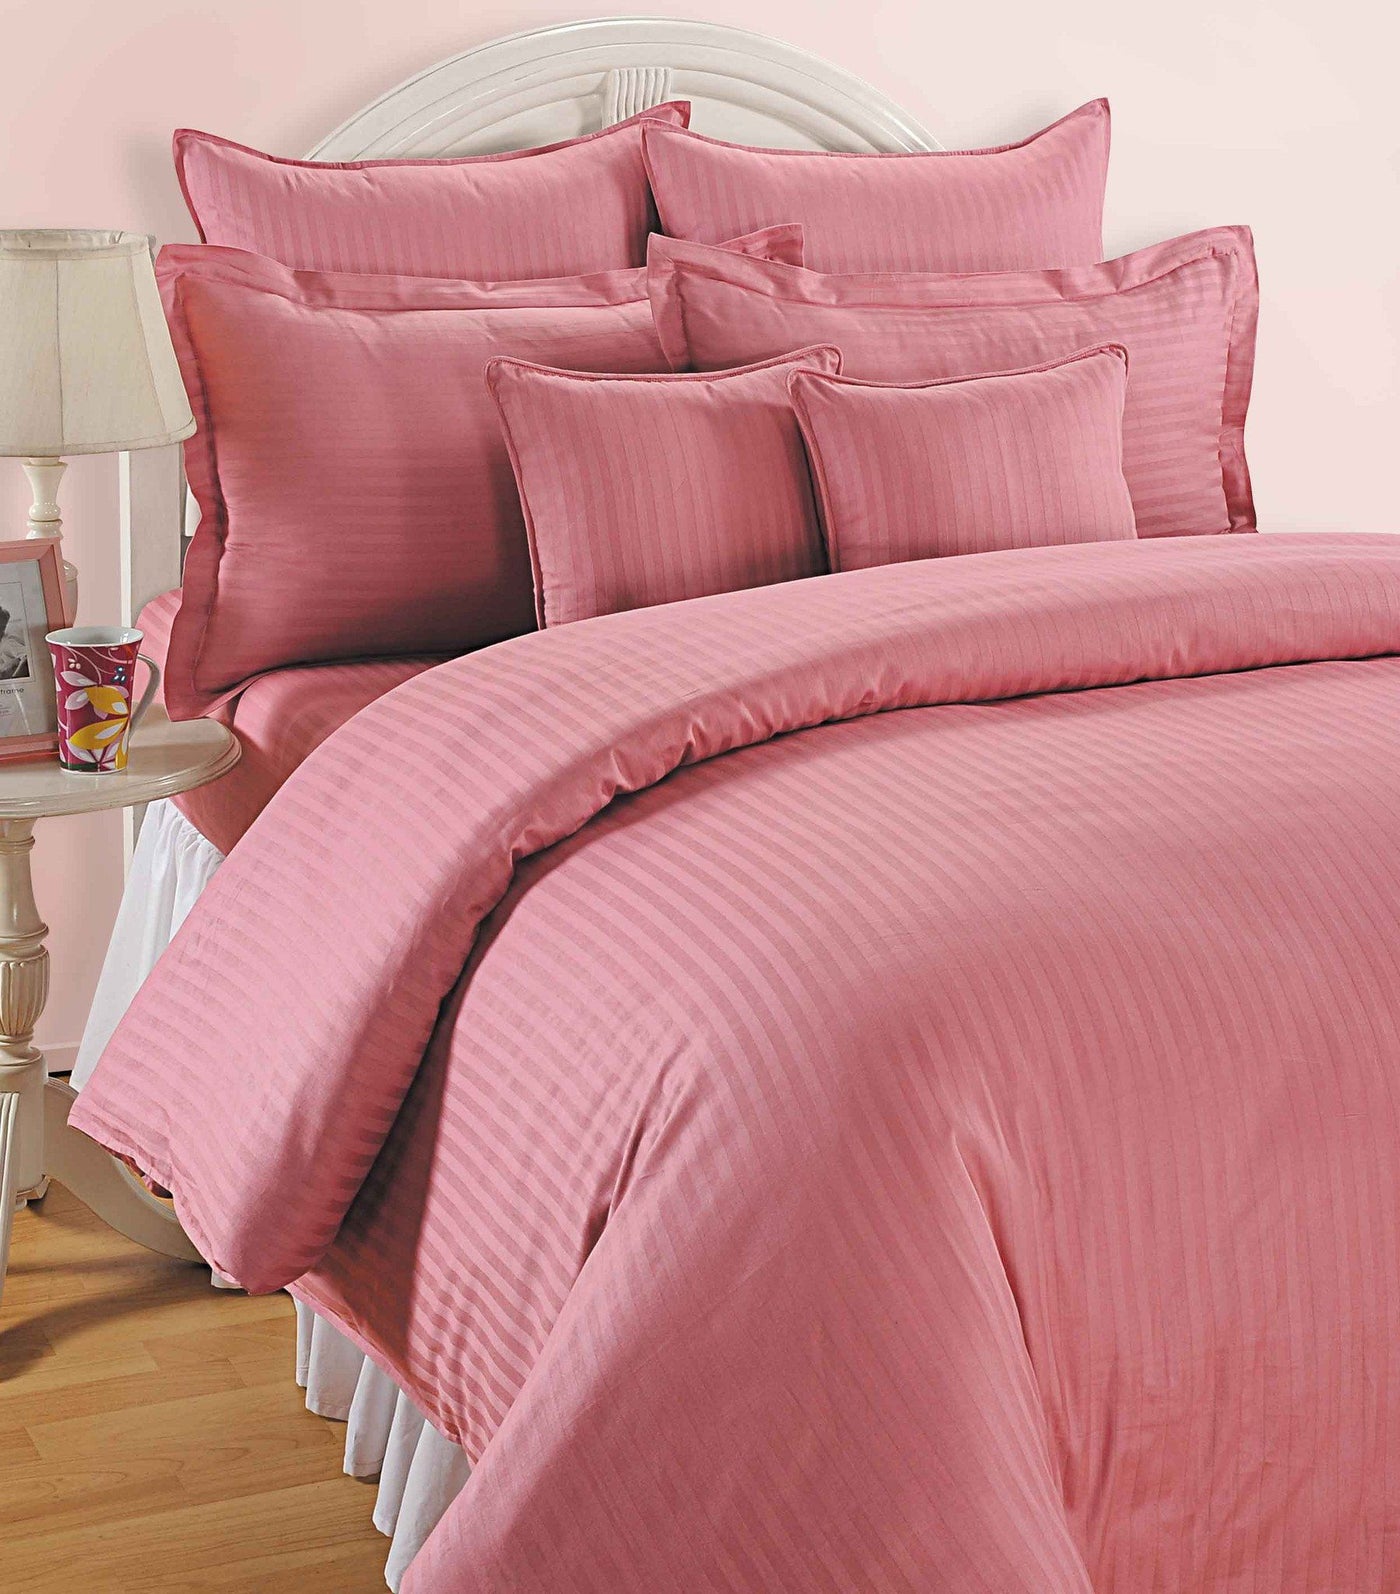 Buy Canopus Pink Duvet Covers Online Flickdeal Flickdeal New